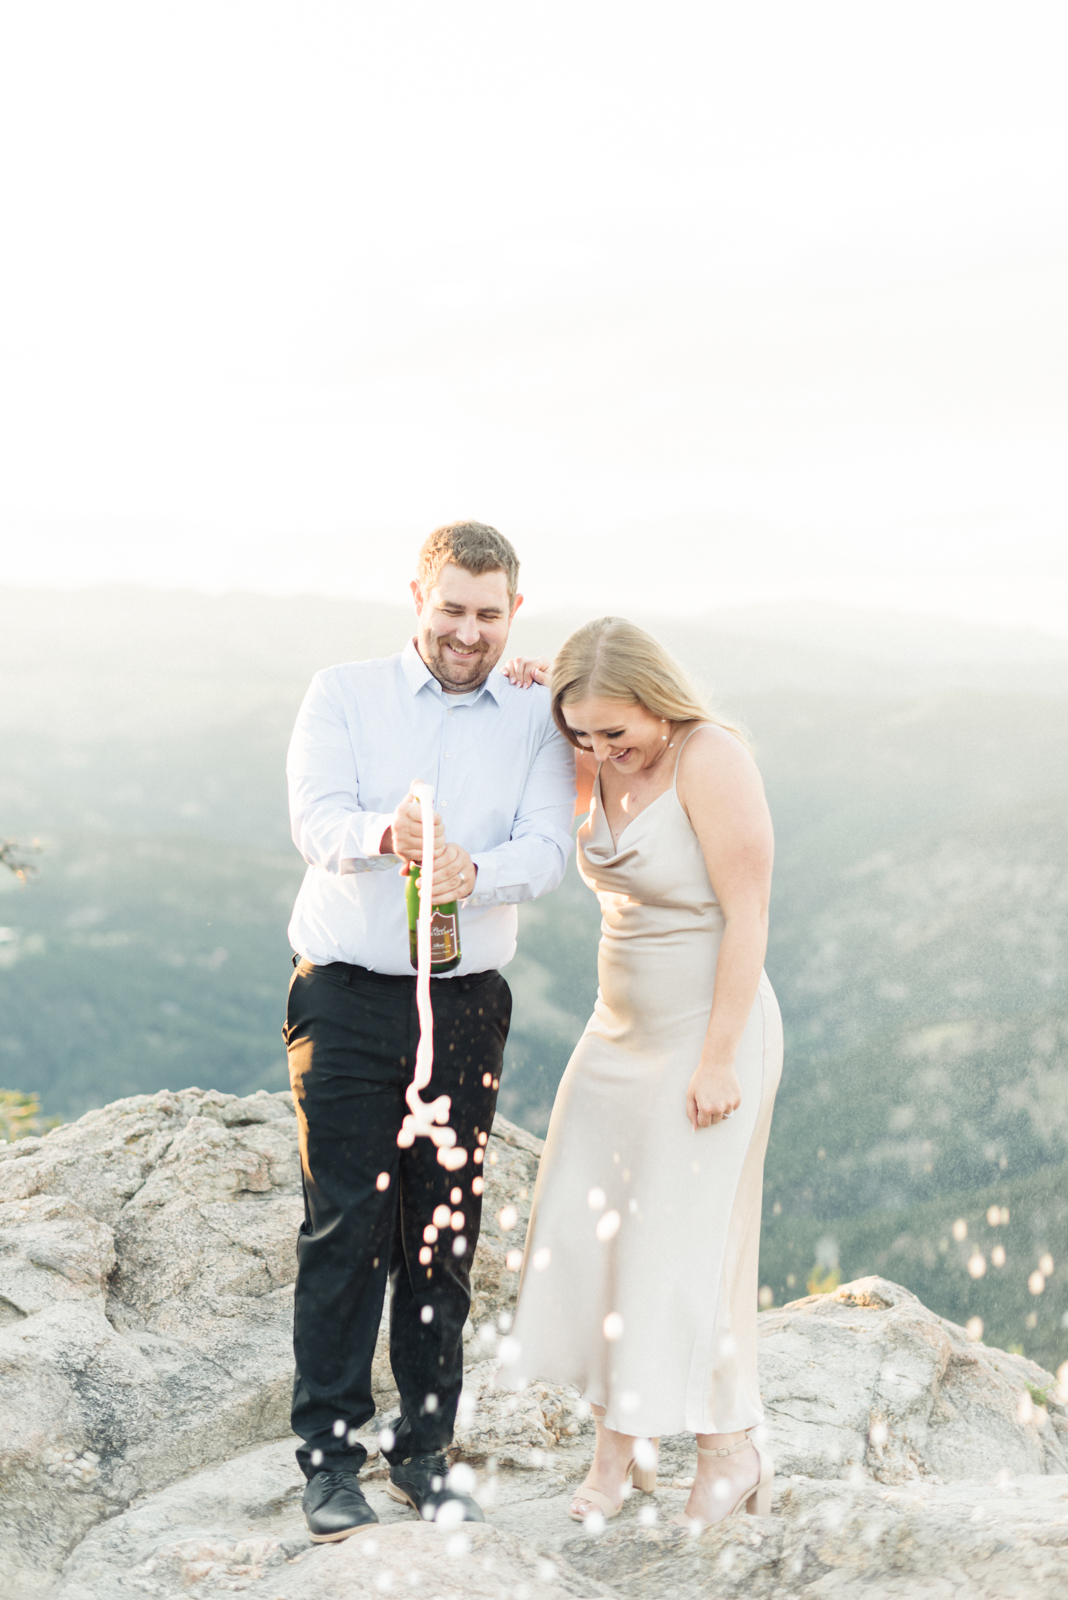 My Top 3 Favorite Engagement Session Tips